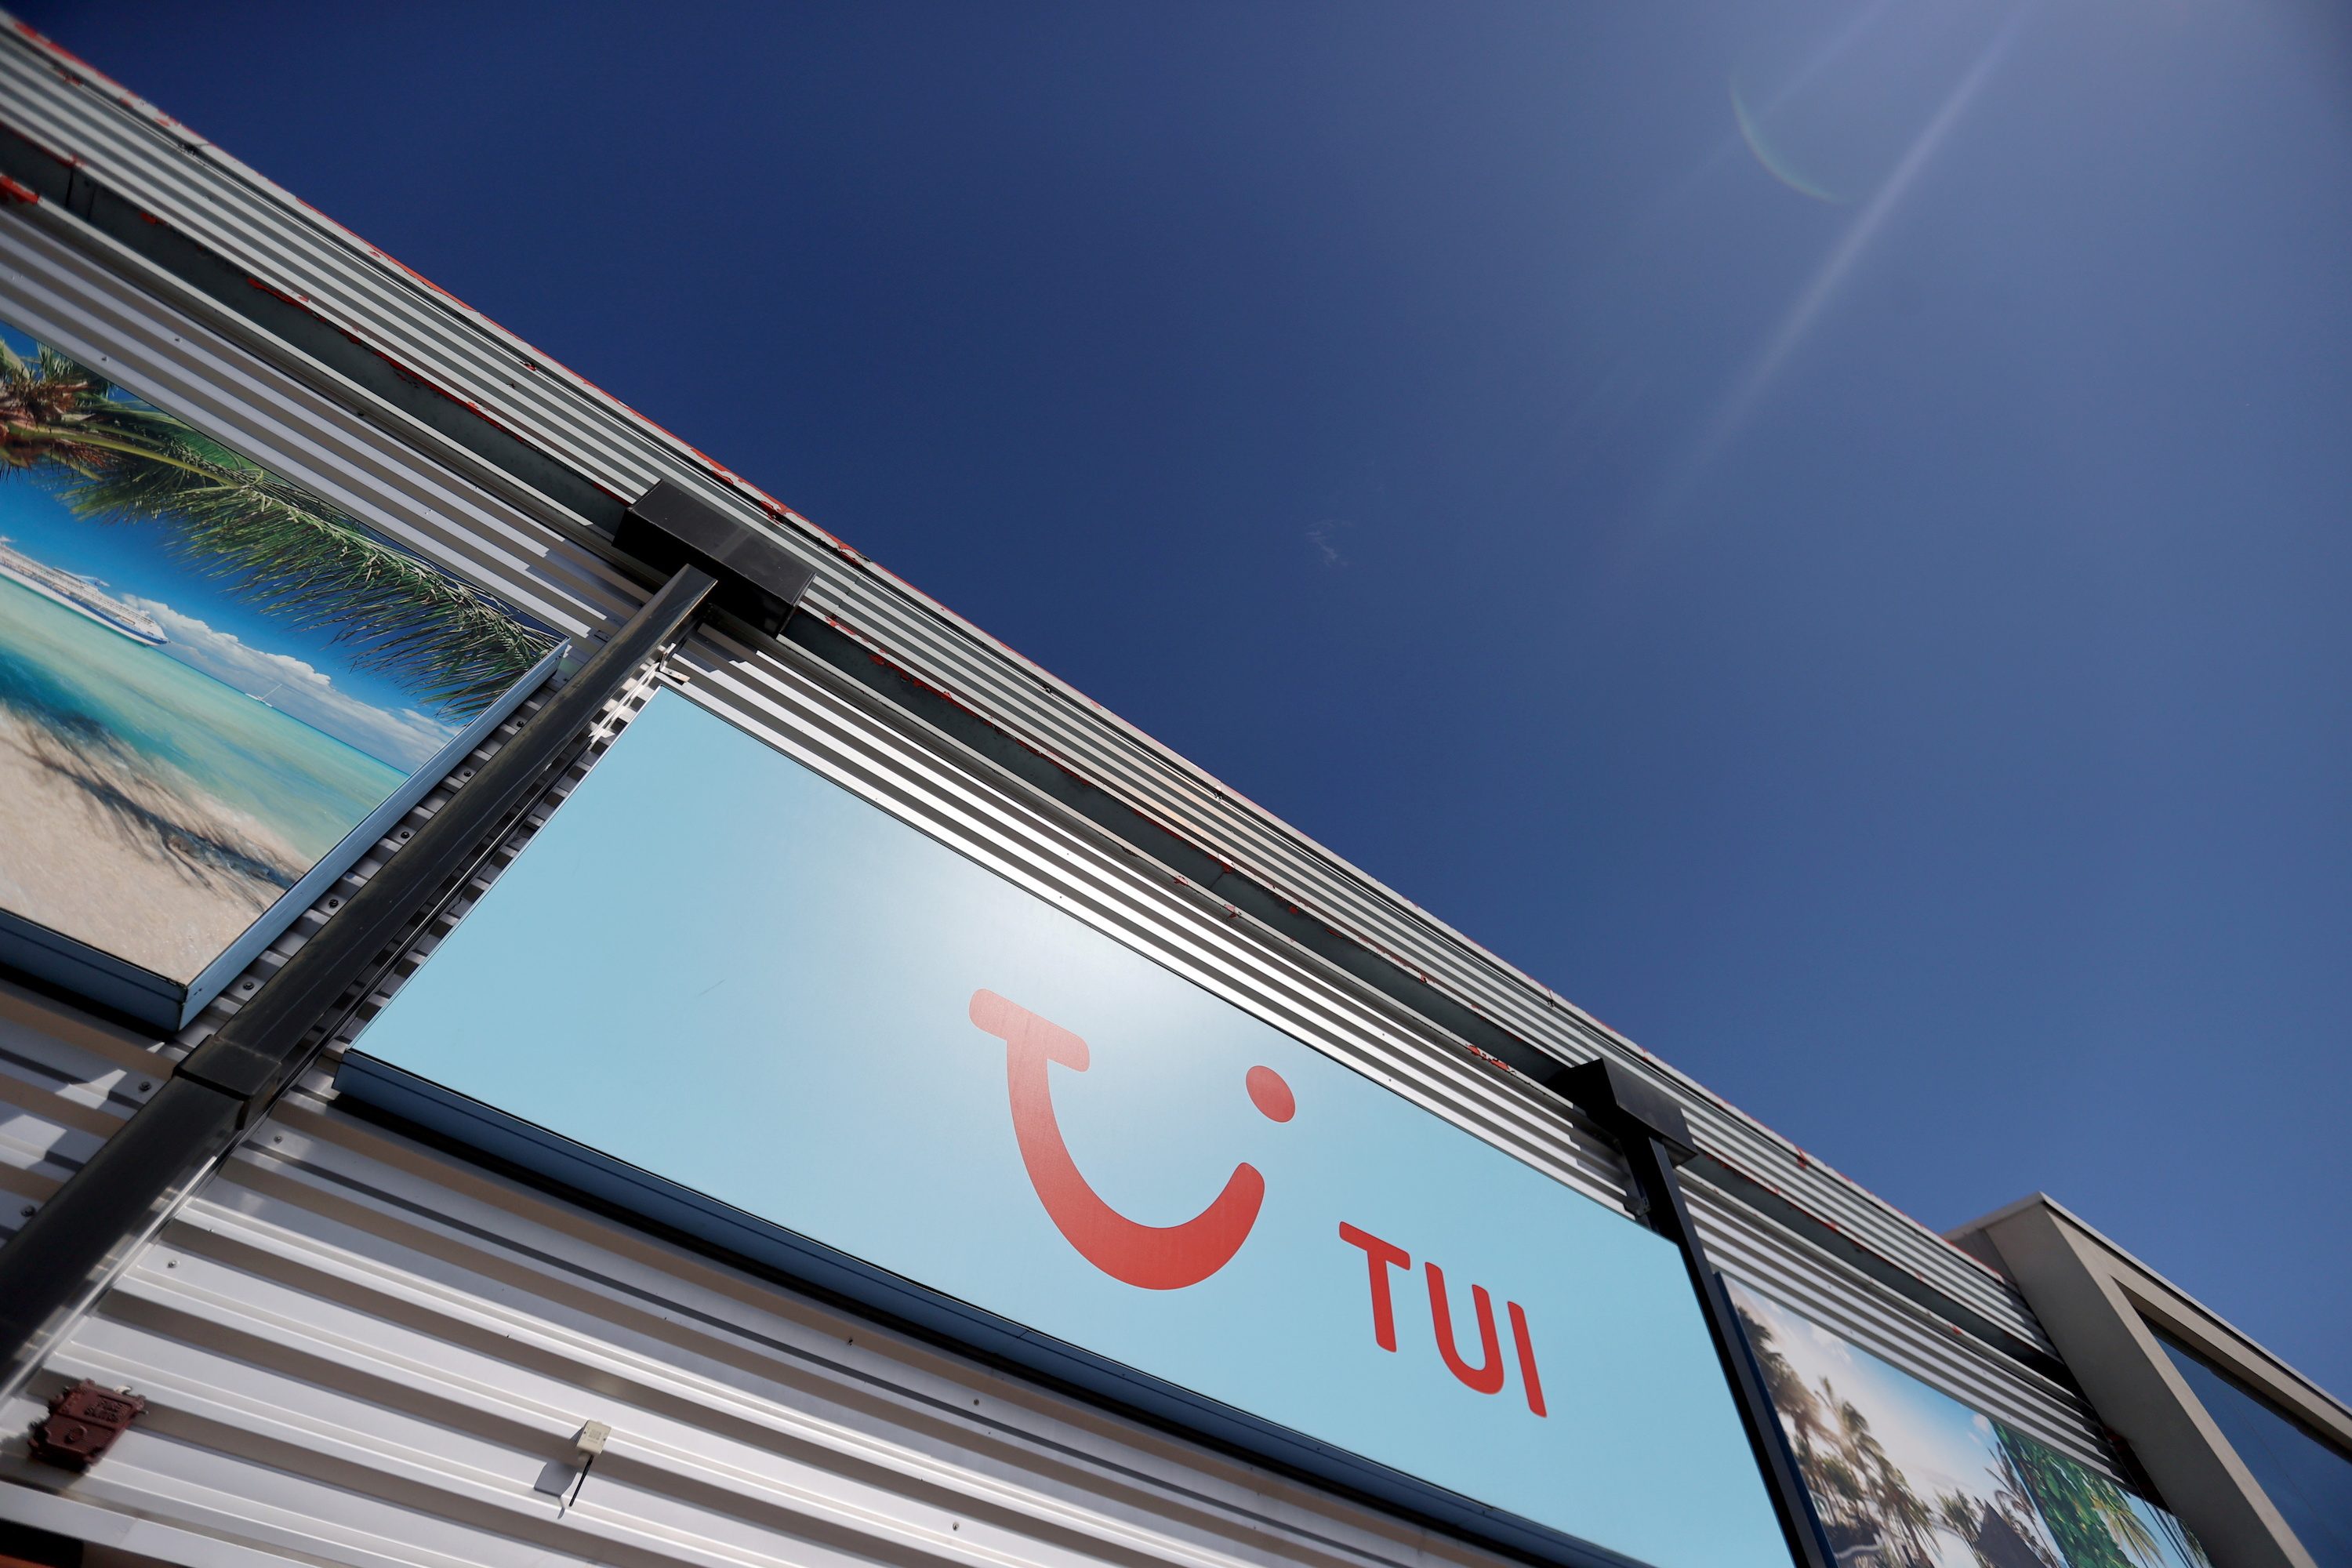 Europe’s summer holiday season can be saved, says TUI